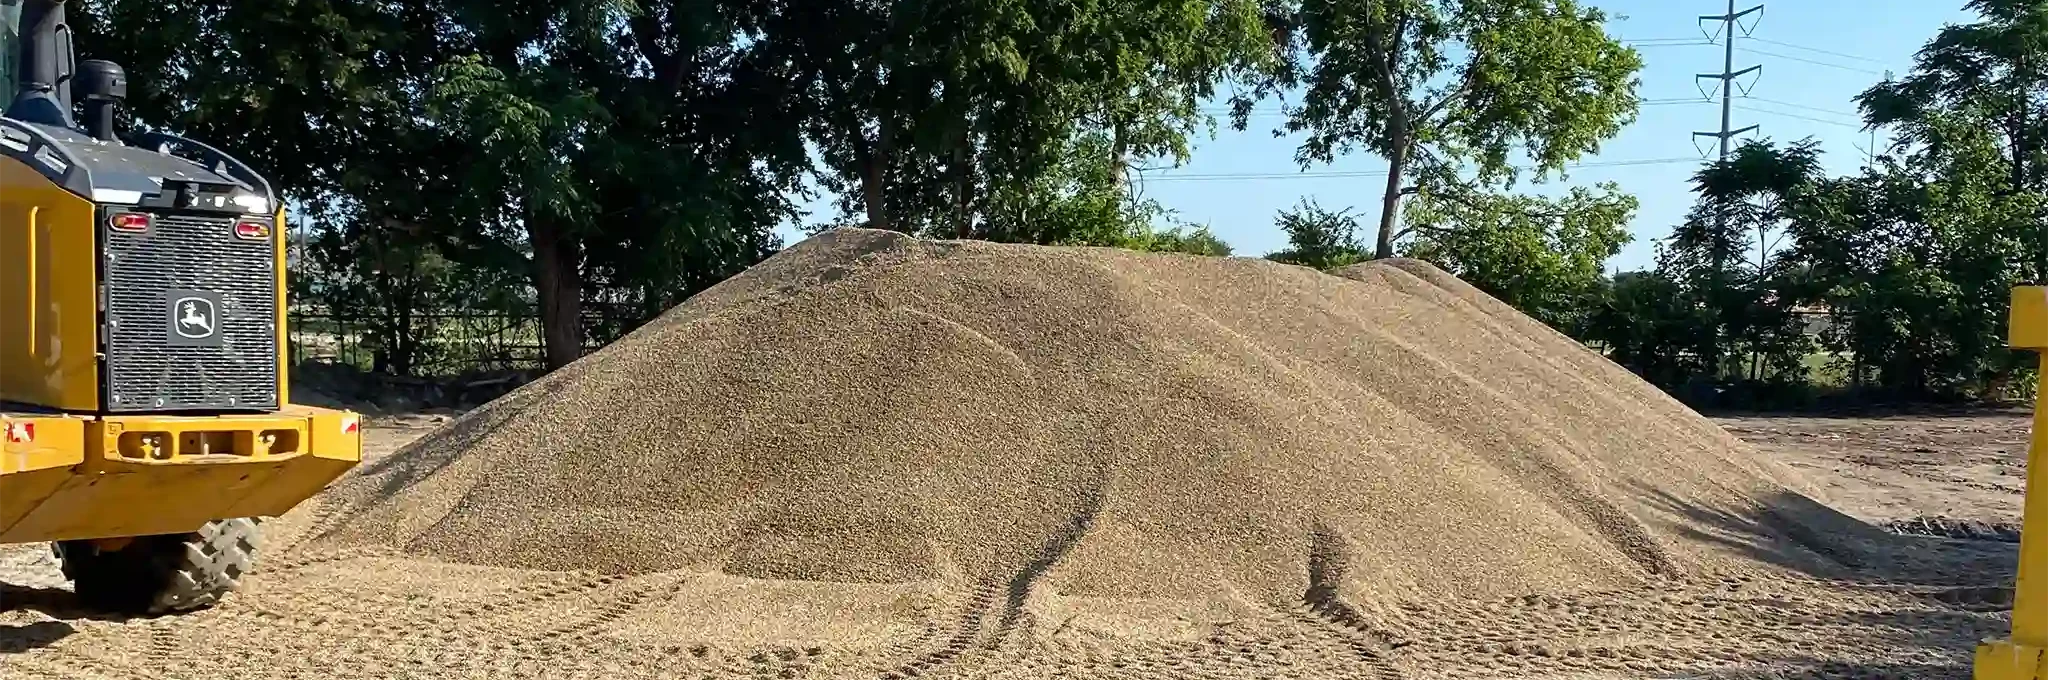 A large pile of 3/8" pea gravel is stored outside with yellow loaders nearby.